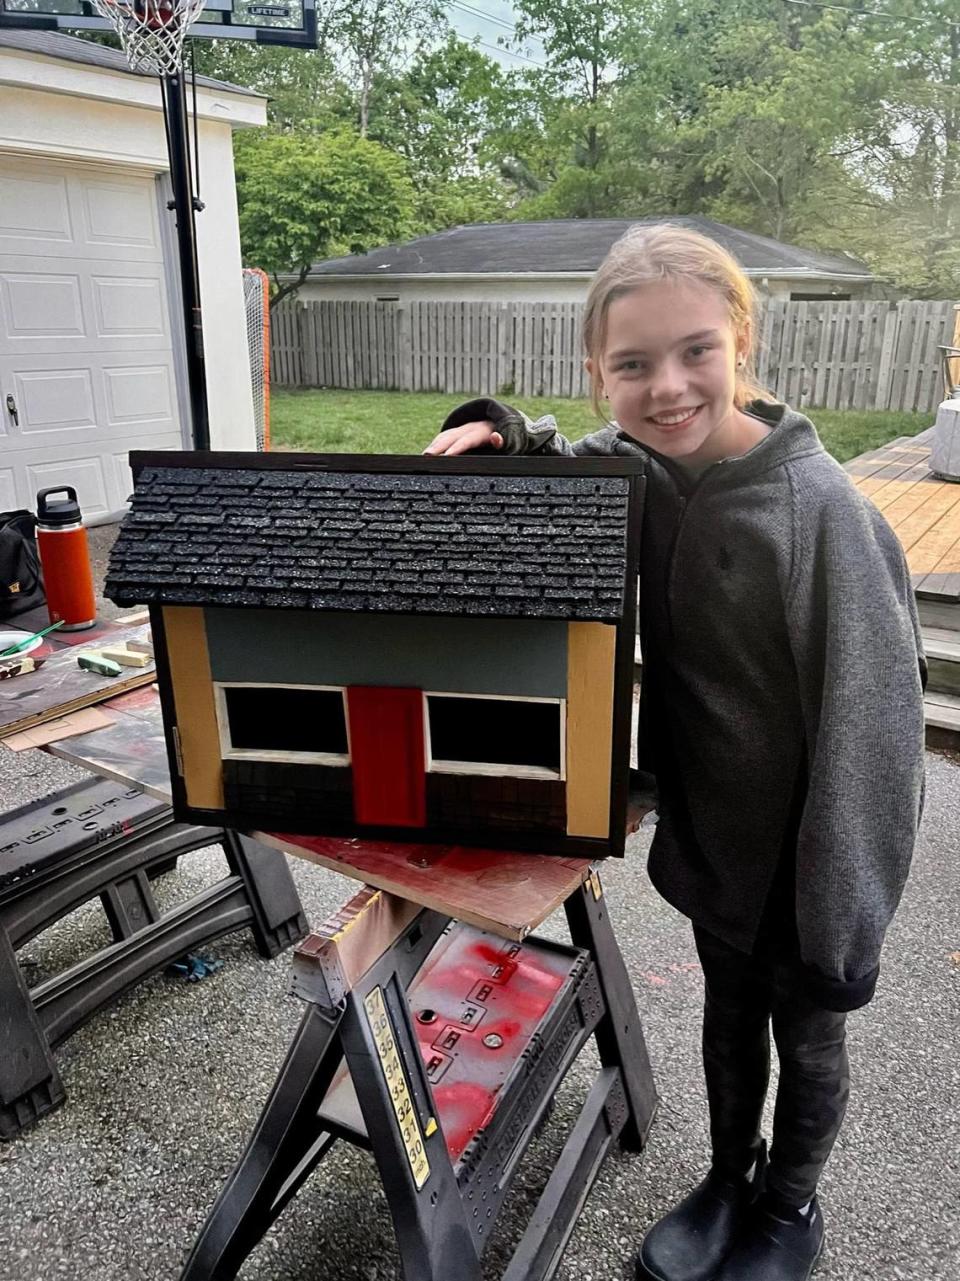 Stella Heathcoat, 11, built a Little Free Library that is a replica of the Chevy Chase Inn on Euclid, which is co-owned by her parents Kevin and Cameron Heathcoat. It was school project that will honor late bartender and family friend Russell Salyer.